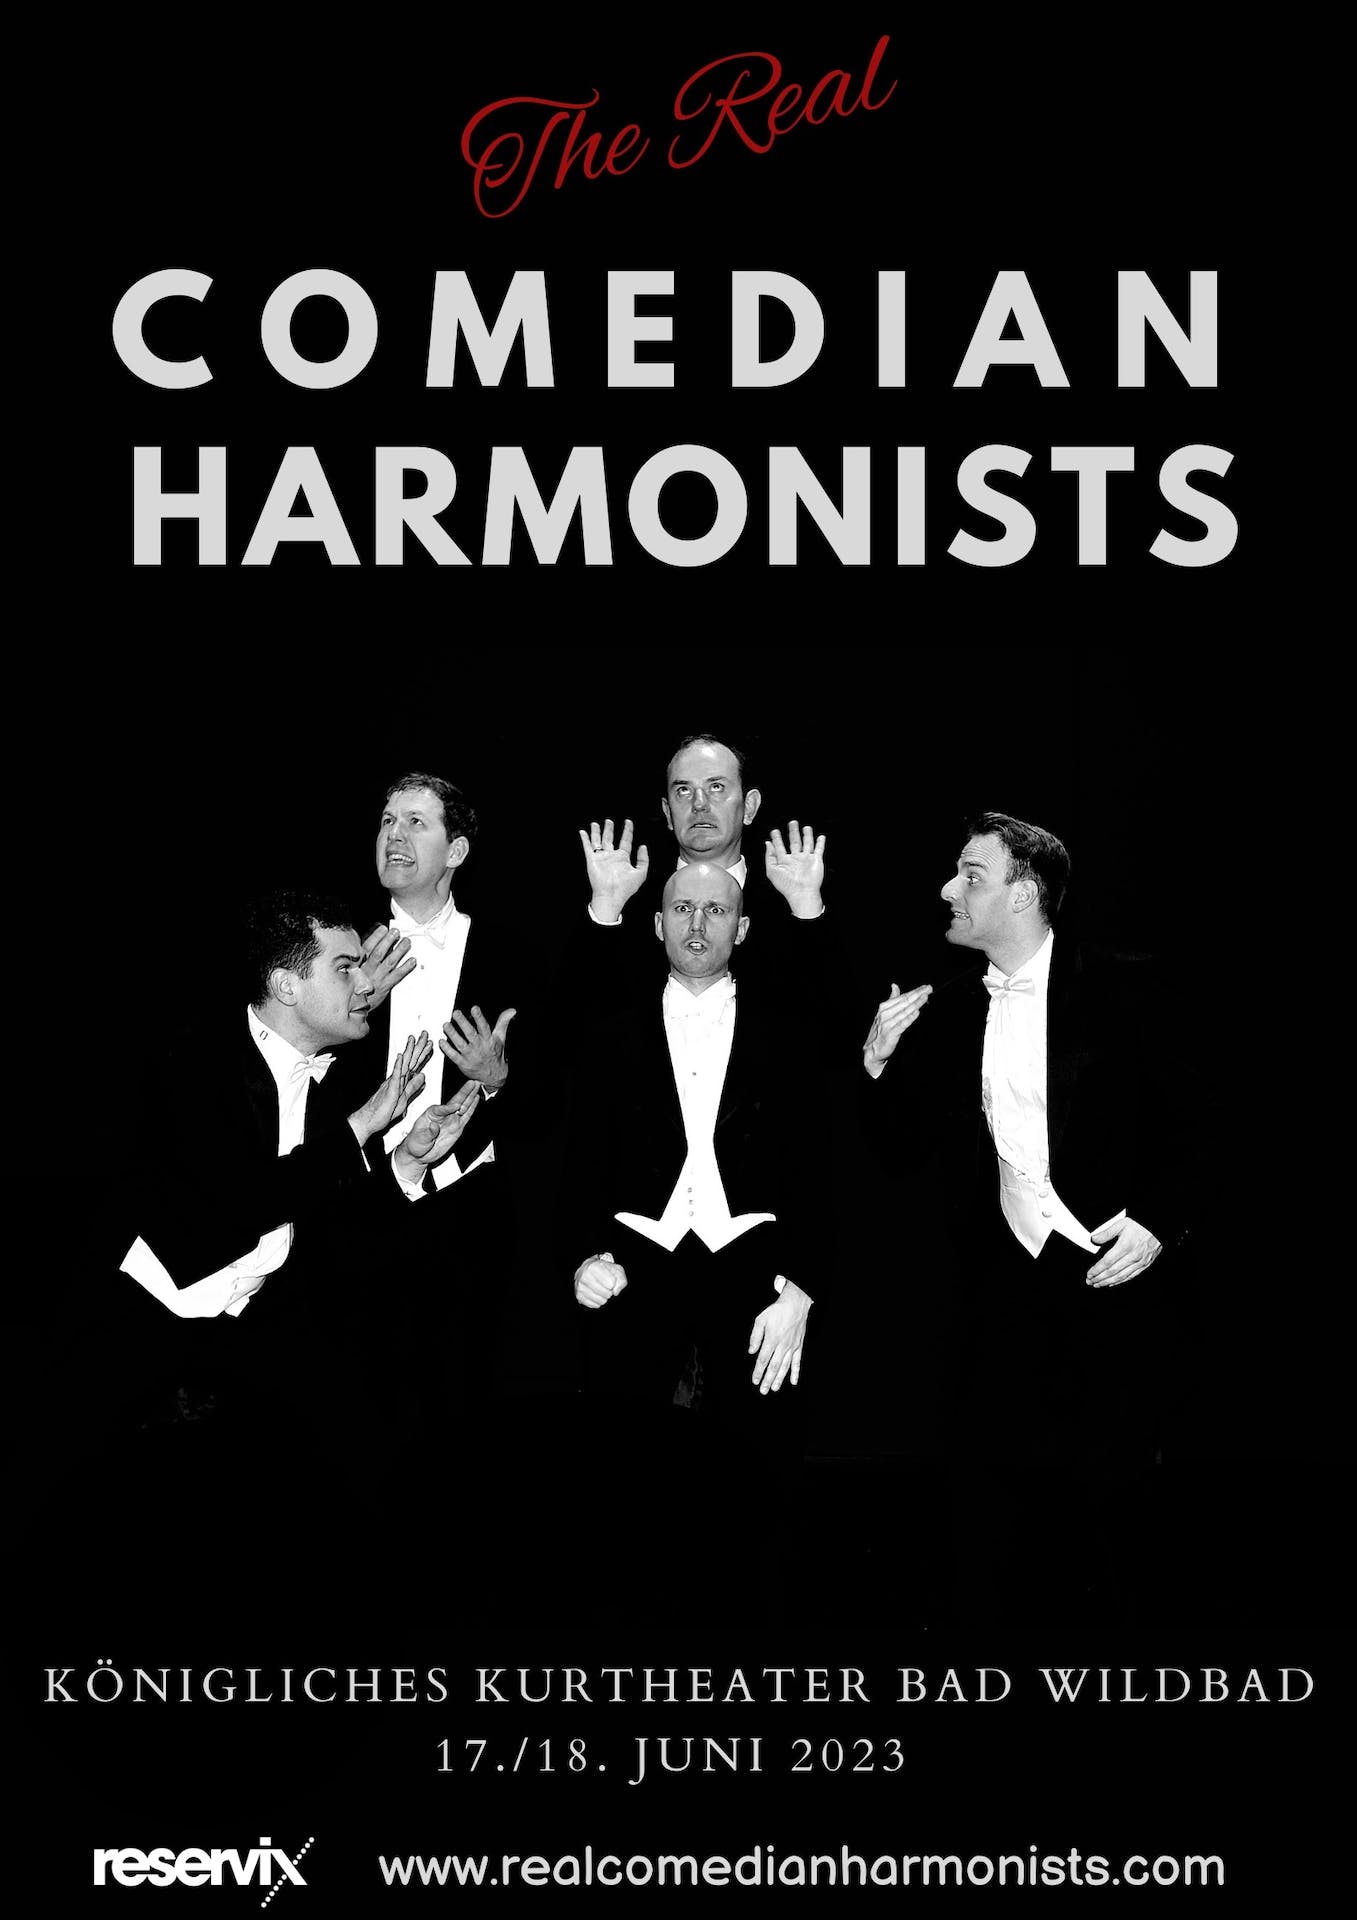 The Real Comedian Harmonists